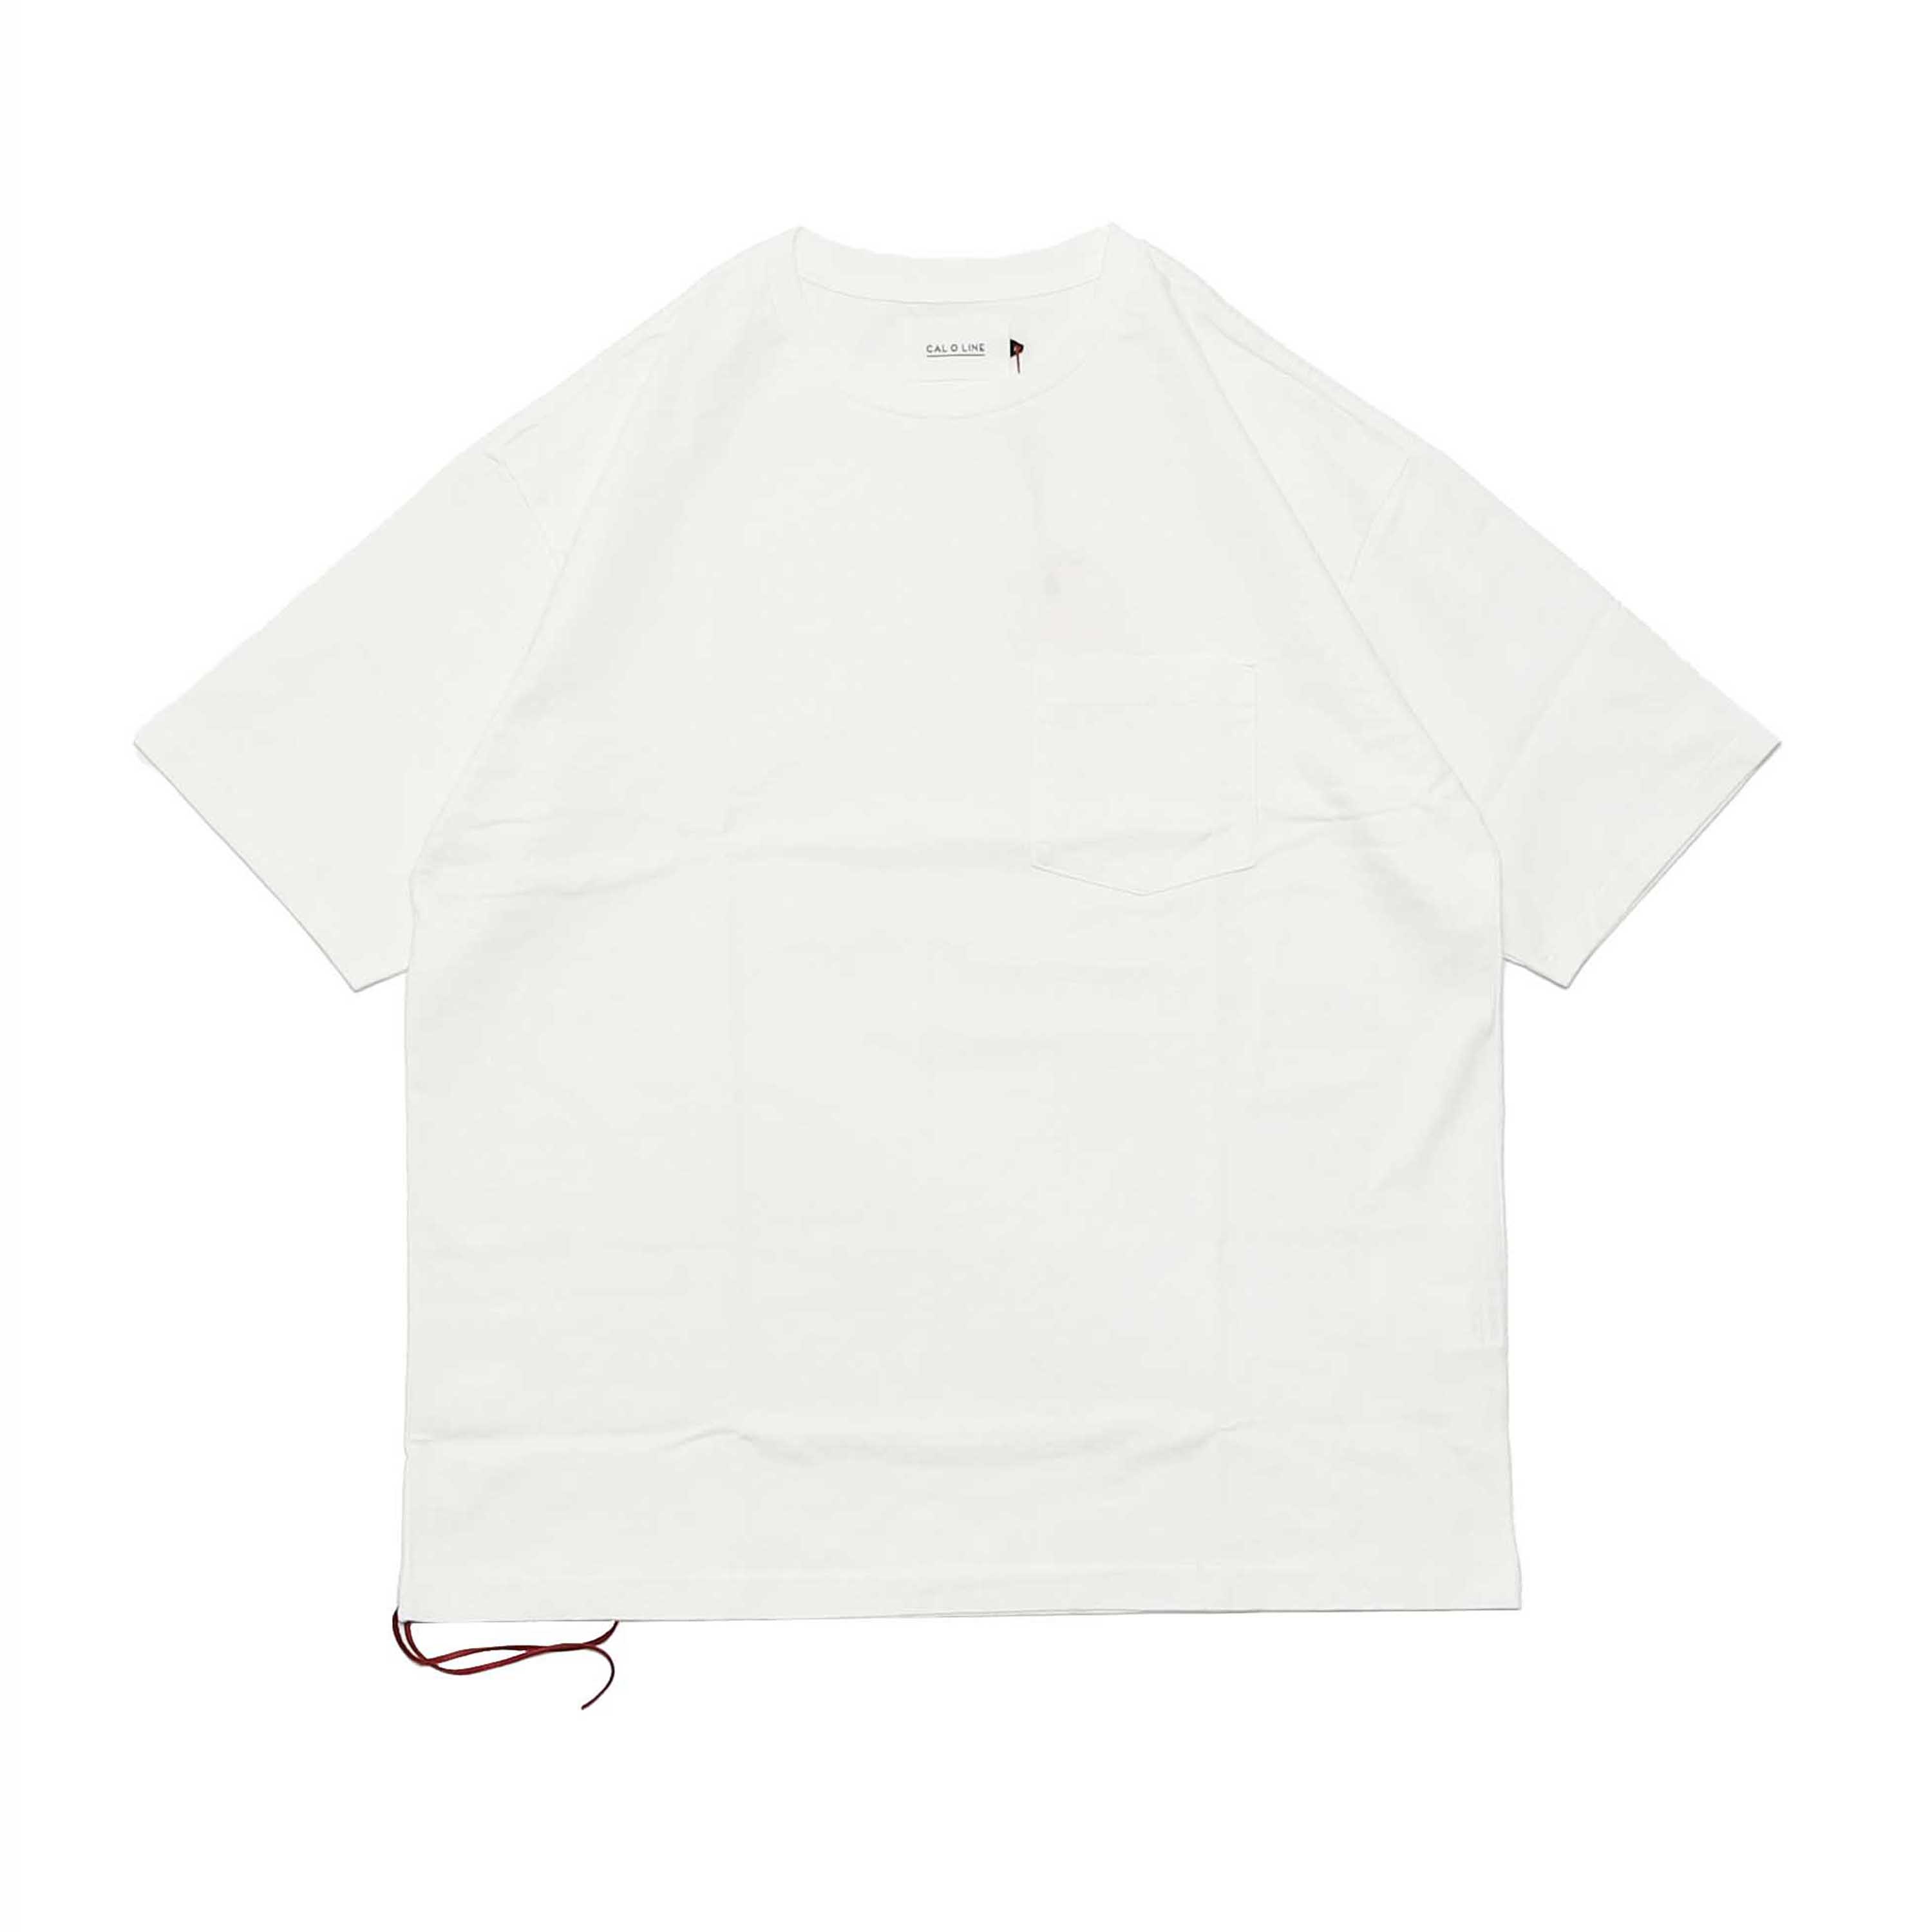 SOLID COLOR POCKET TEE - WHITE B